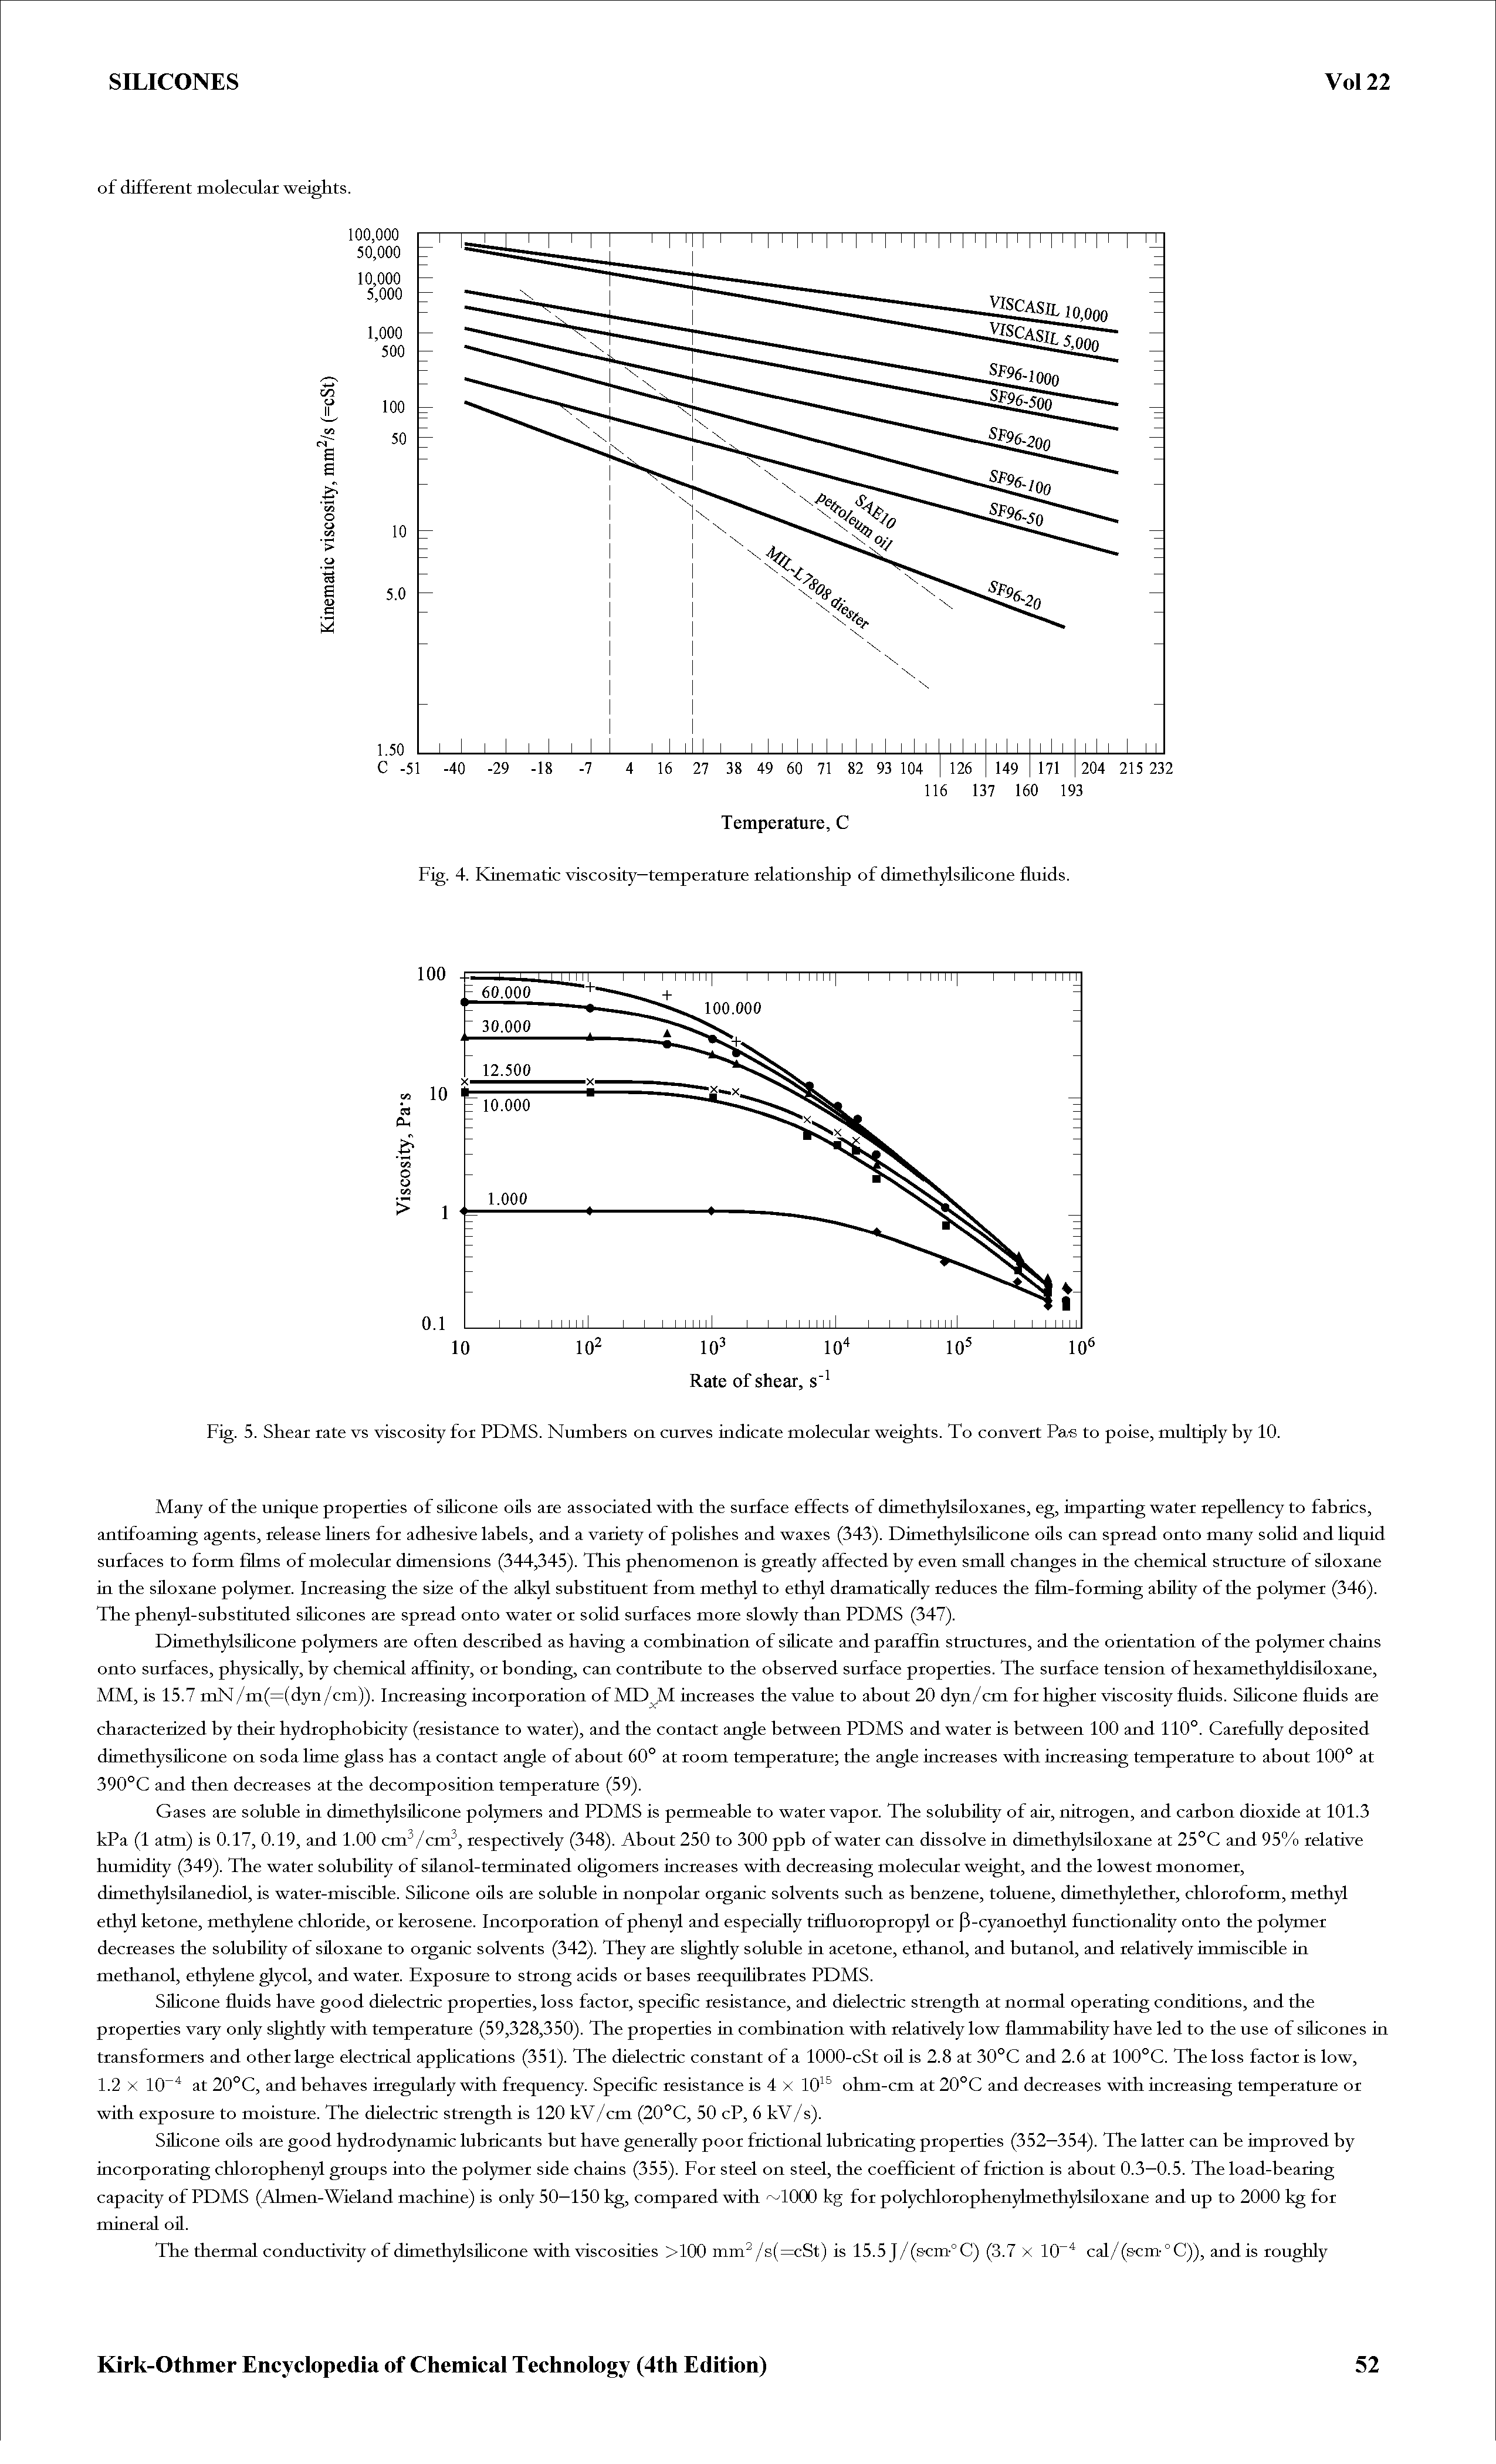 Fig. 5. Shear rate vs viscosity for PDMS. Numbers on curves indicate molecular weights. To convert Pa-s to poise, multiply by 10.